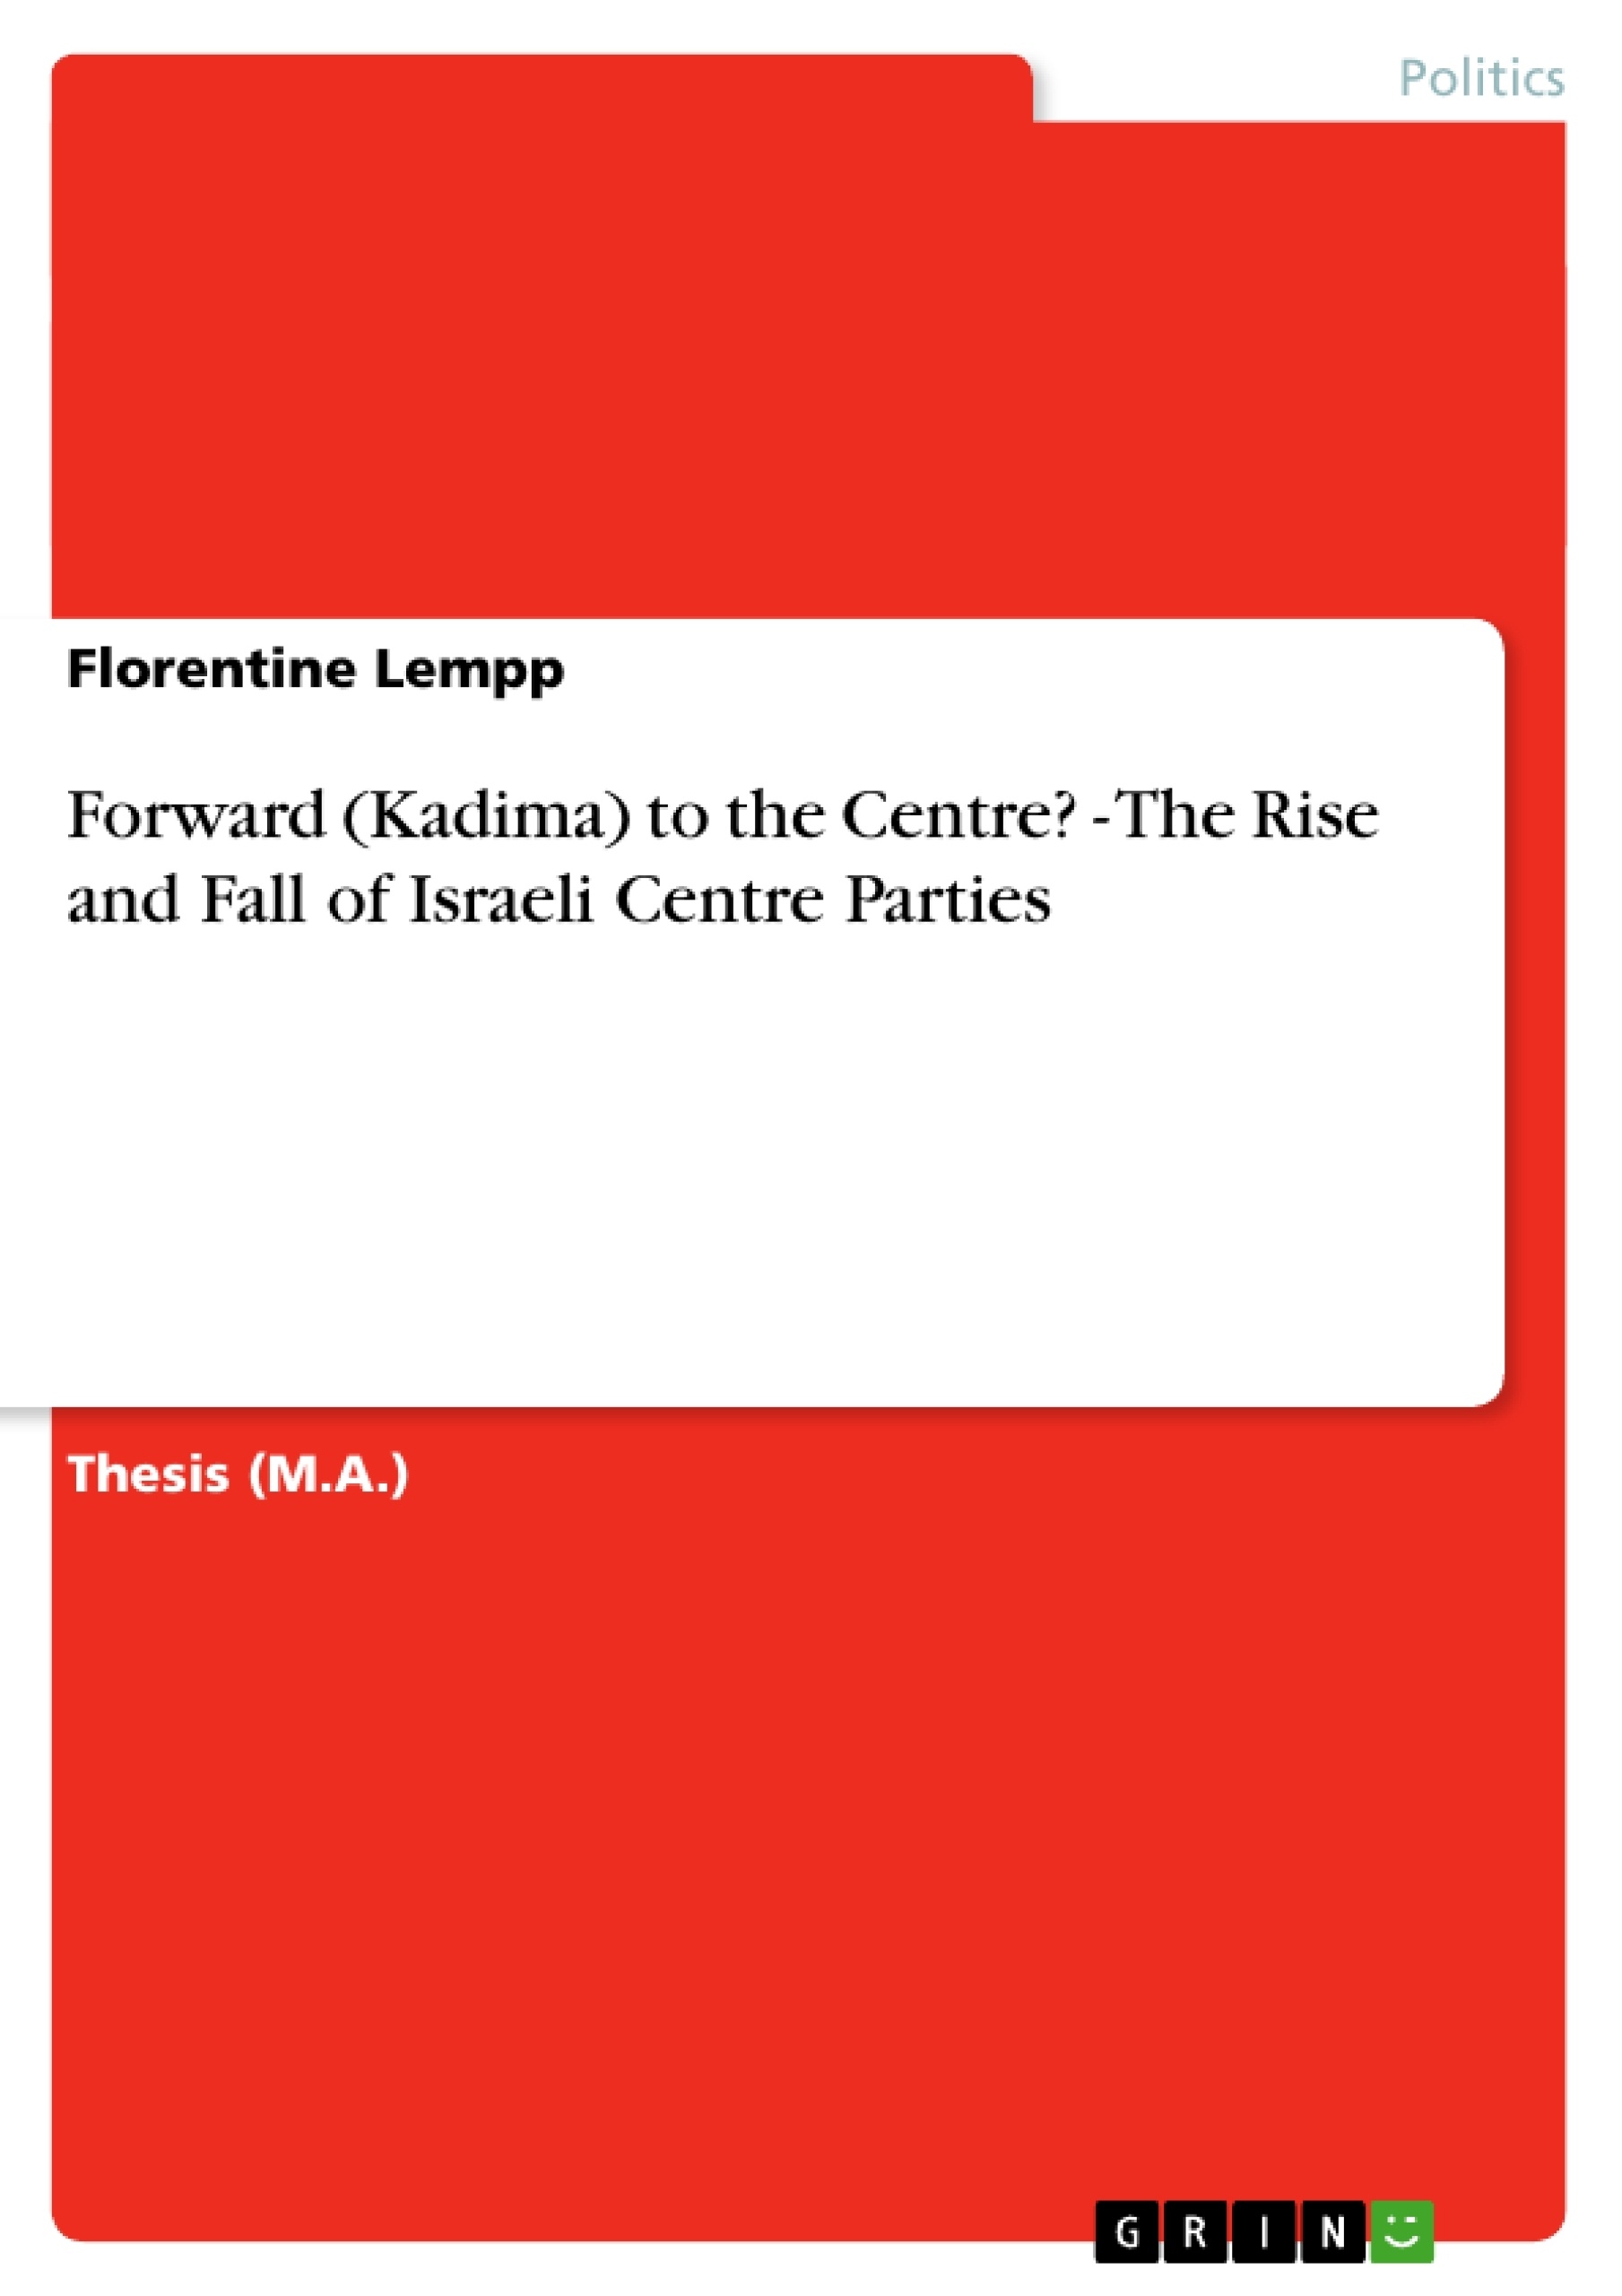 Título: Forward (Kadima) to the Centre? - The Rise and Fall of Israeli Centre Parties